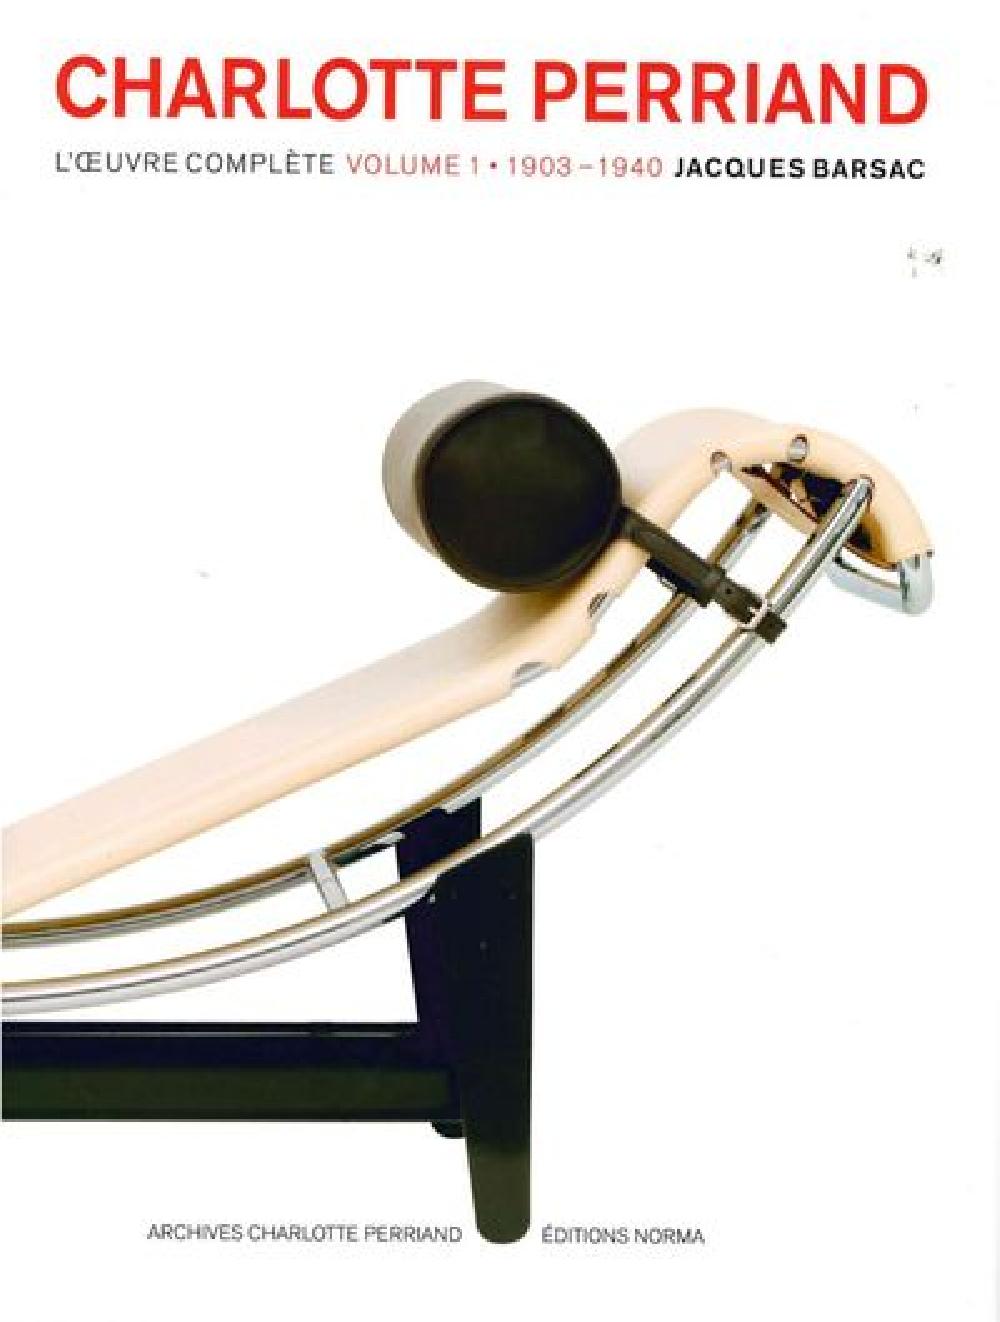 Charlotte Perriand - L'oeuvre complète Volume 1, 1903-1940 